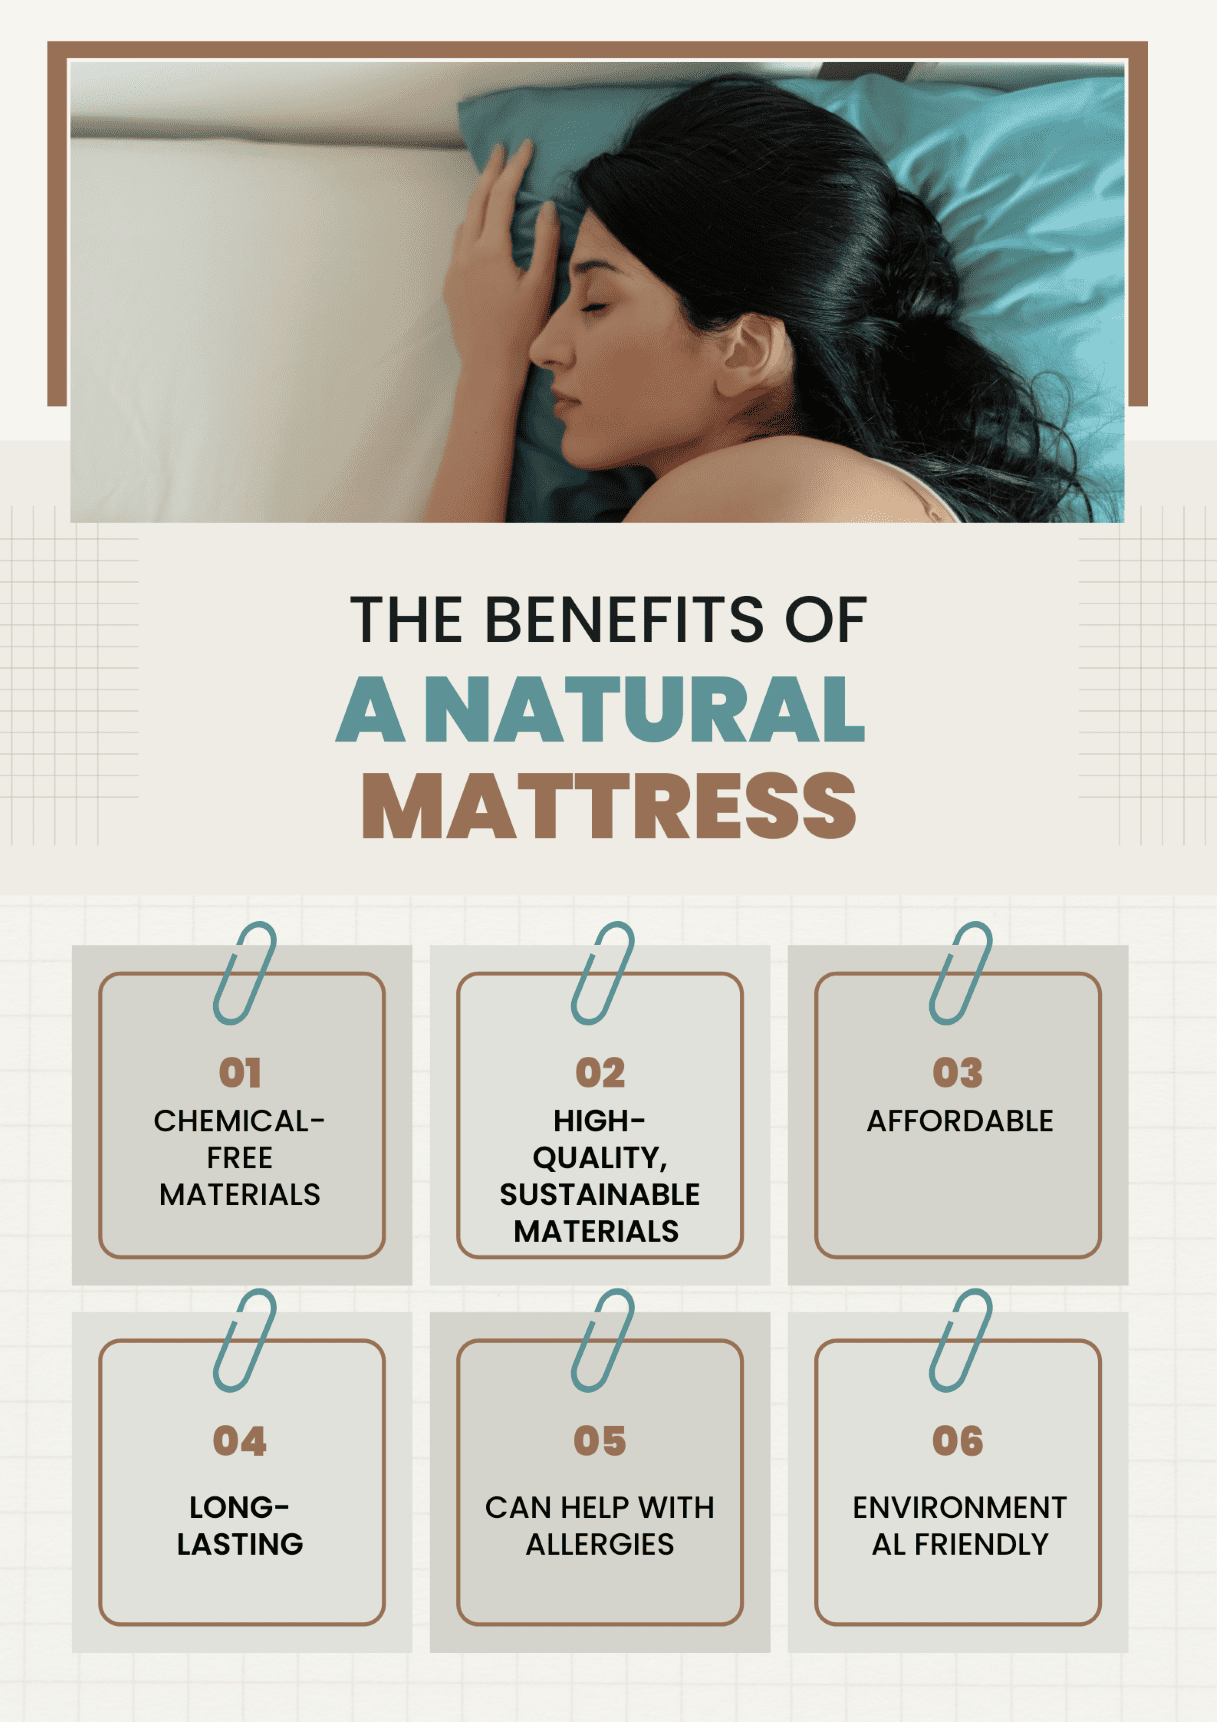 What is a Natural Mattress and its benefits